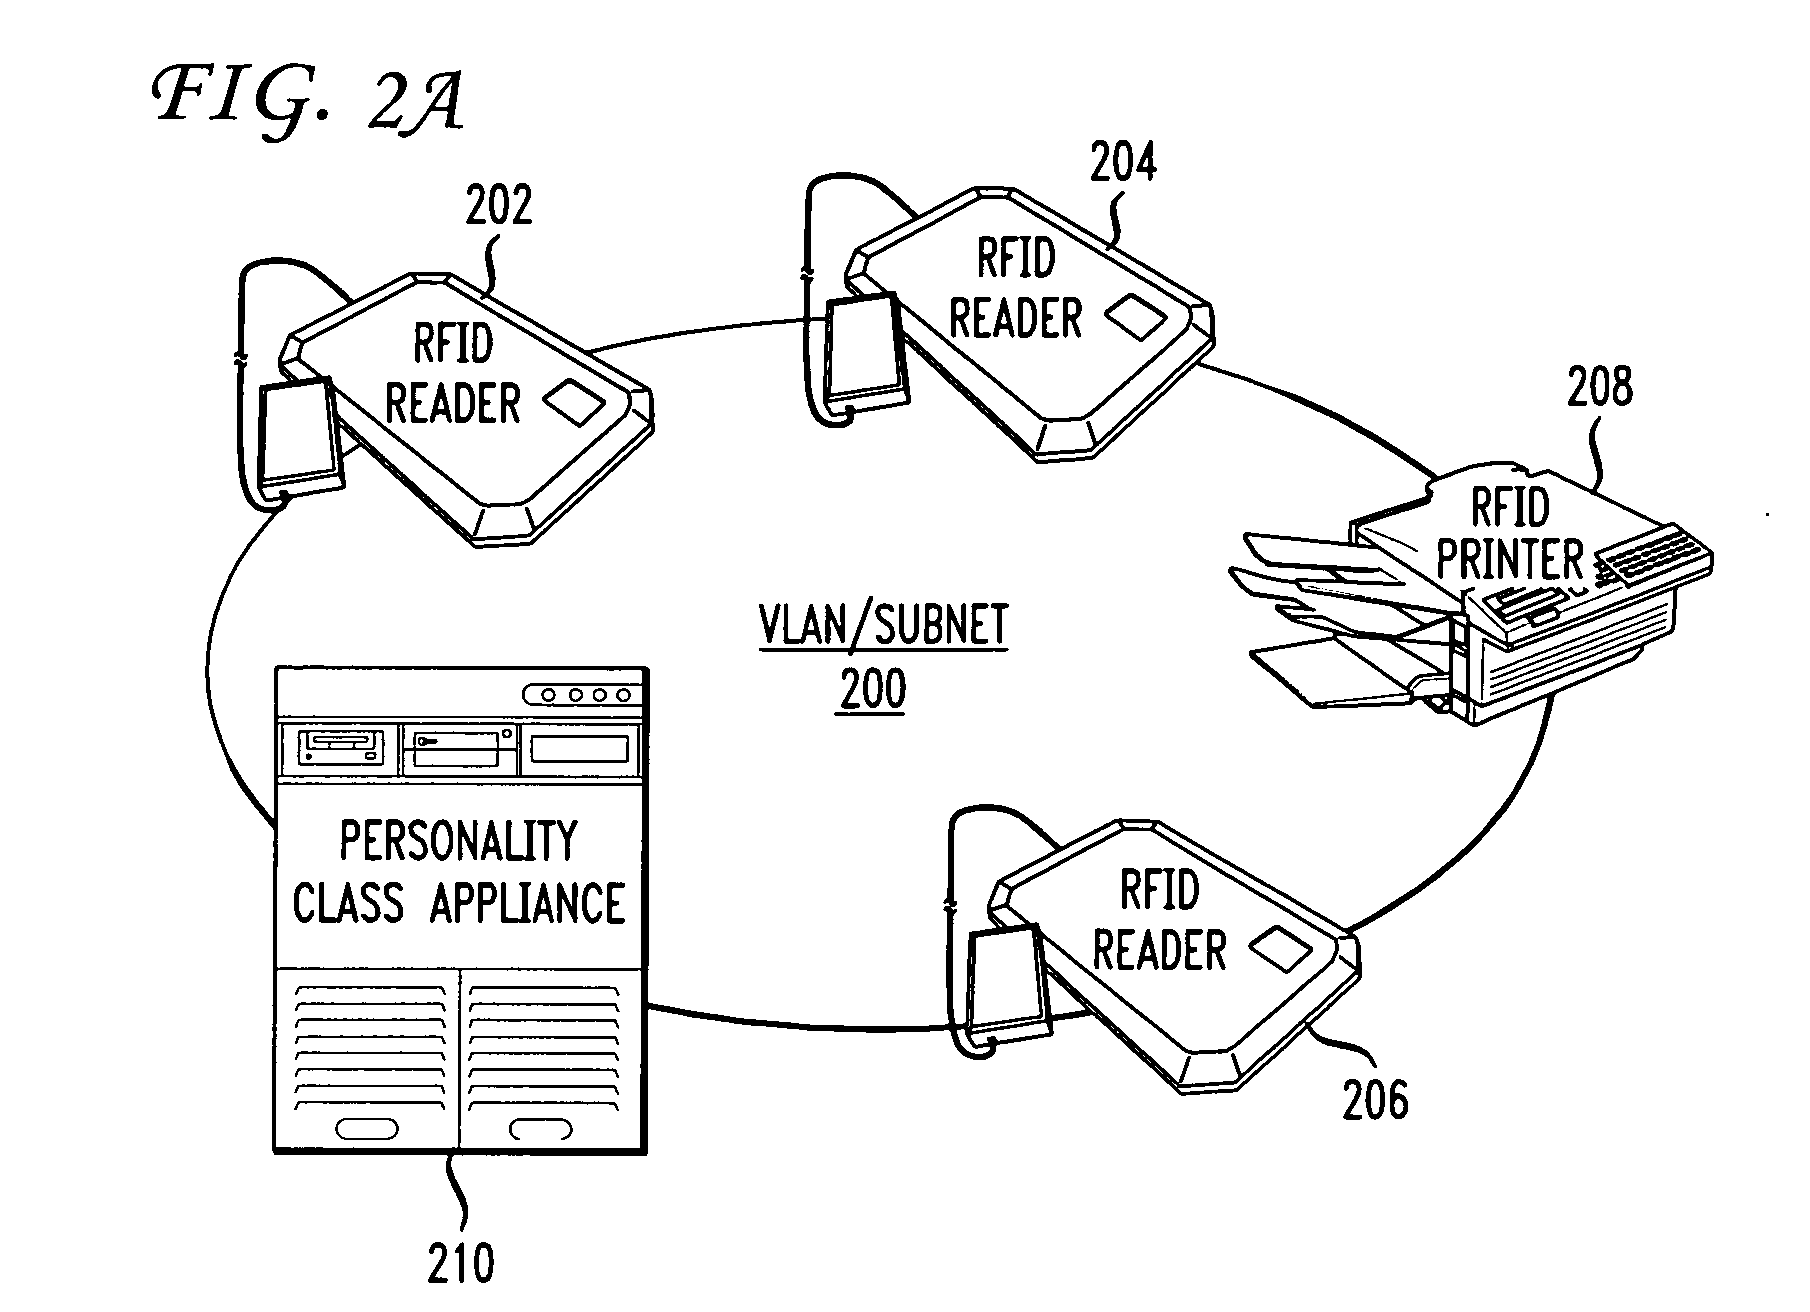 Methods and systems for automatic device provisioning in an RFID network using IP multicast